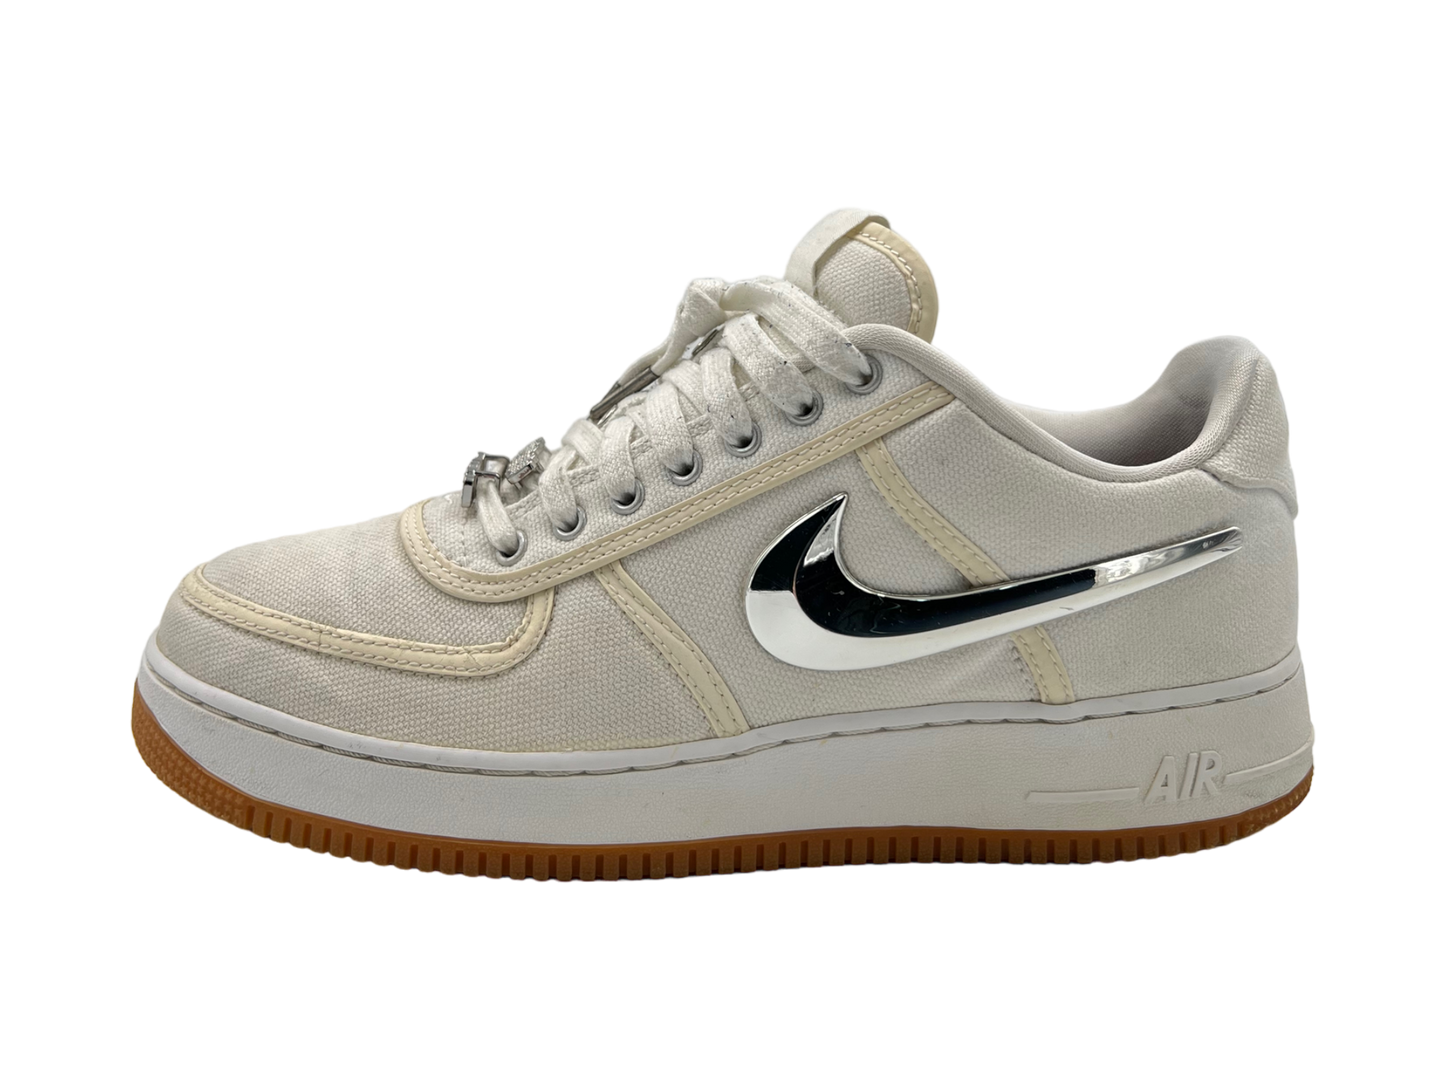 Nike Travis Scott Air Force 1 Low OG COND 8.5/10 (NOT 1 PATCH AND 2 SWOOSHES)